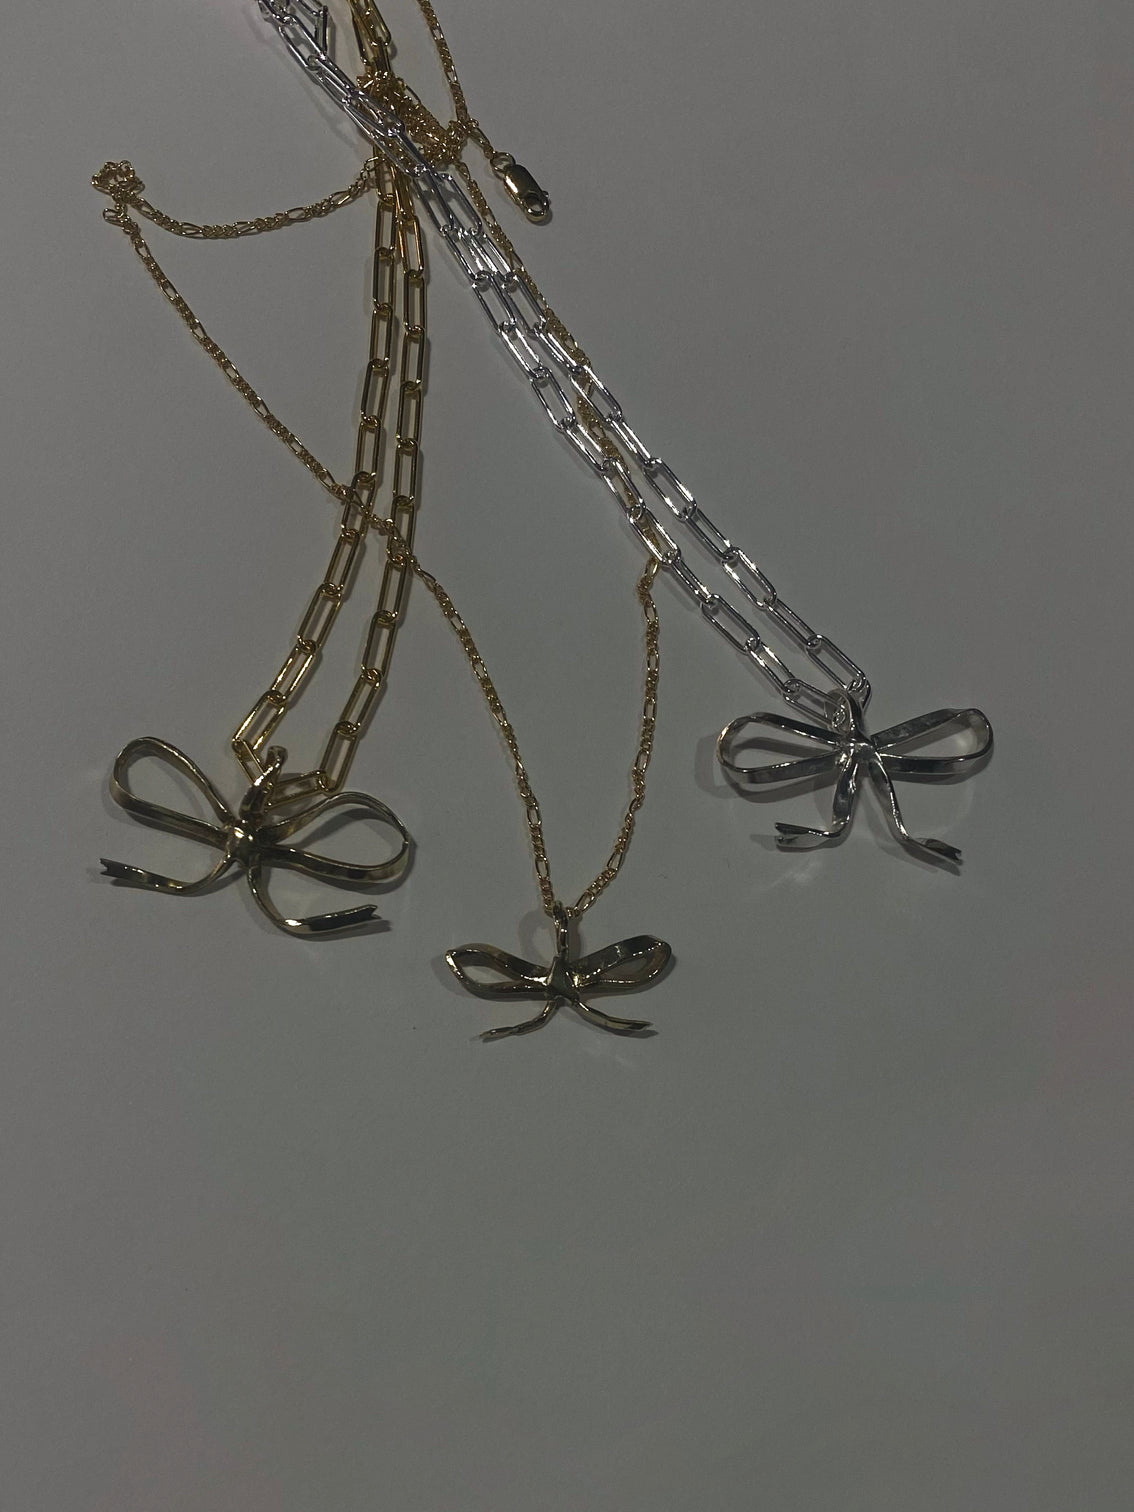 3 silver and gold bow pendants on grey background with tangled chains